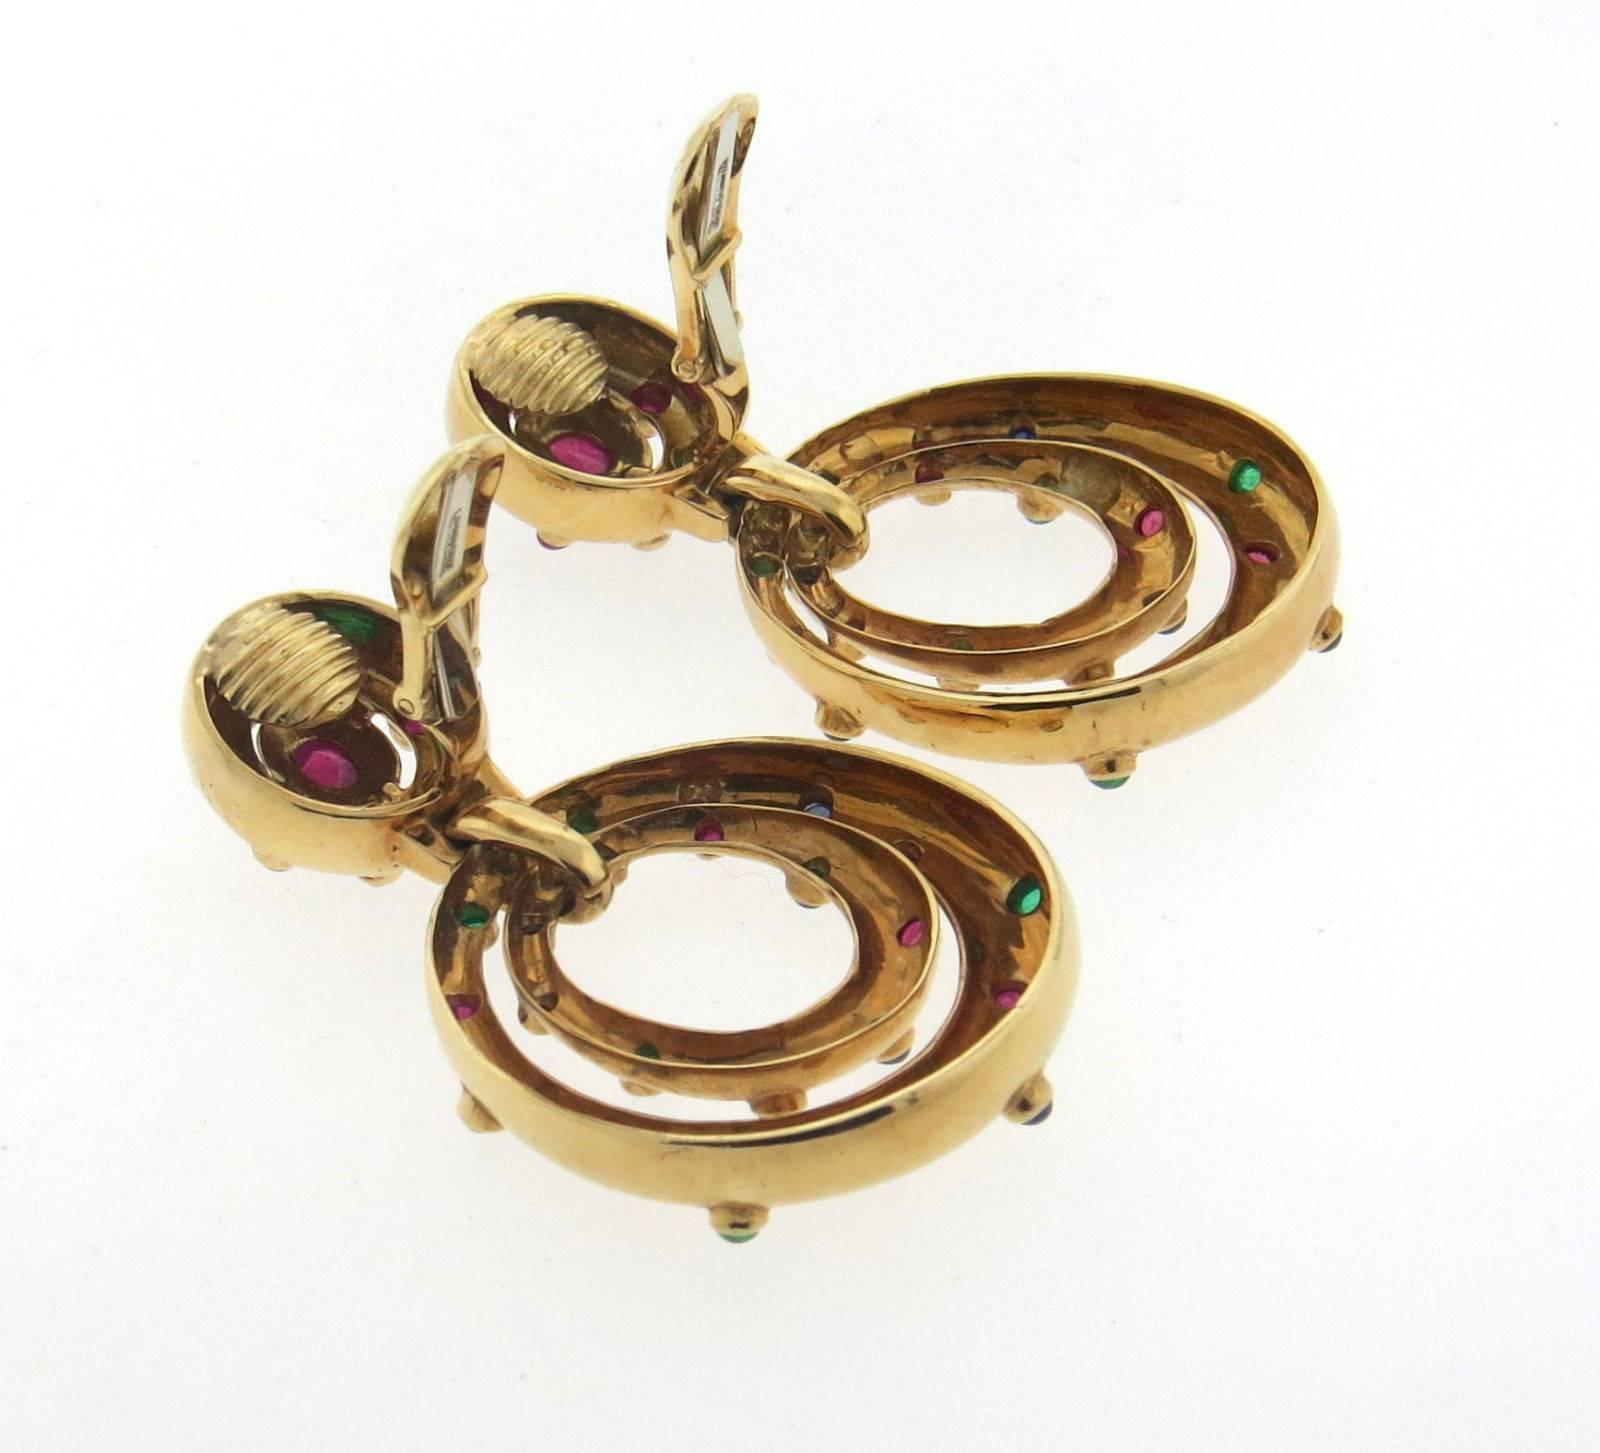 A pair of 18k yellow gold earrings set with sapphire, emerald and ruby cabochons.  Crafted by David Webb, the earrings measure 55mm long x 32mm wide and weigh 39.6 grams.  Marked: Webb, 18k